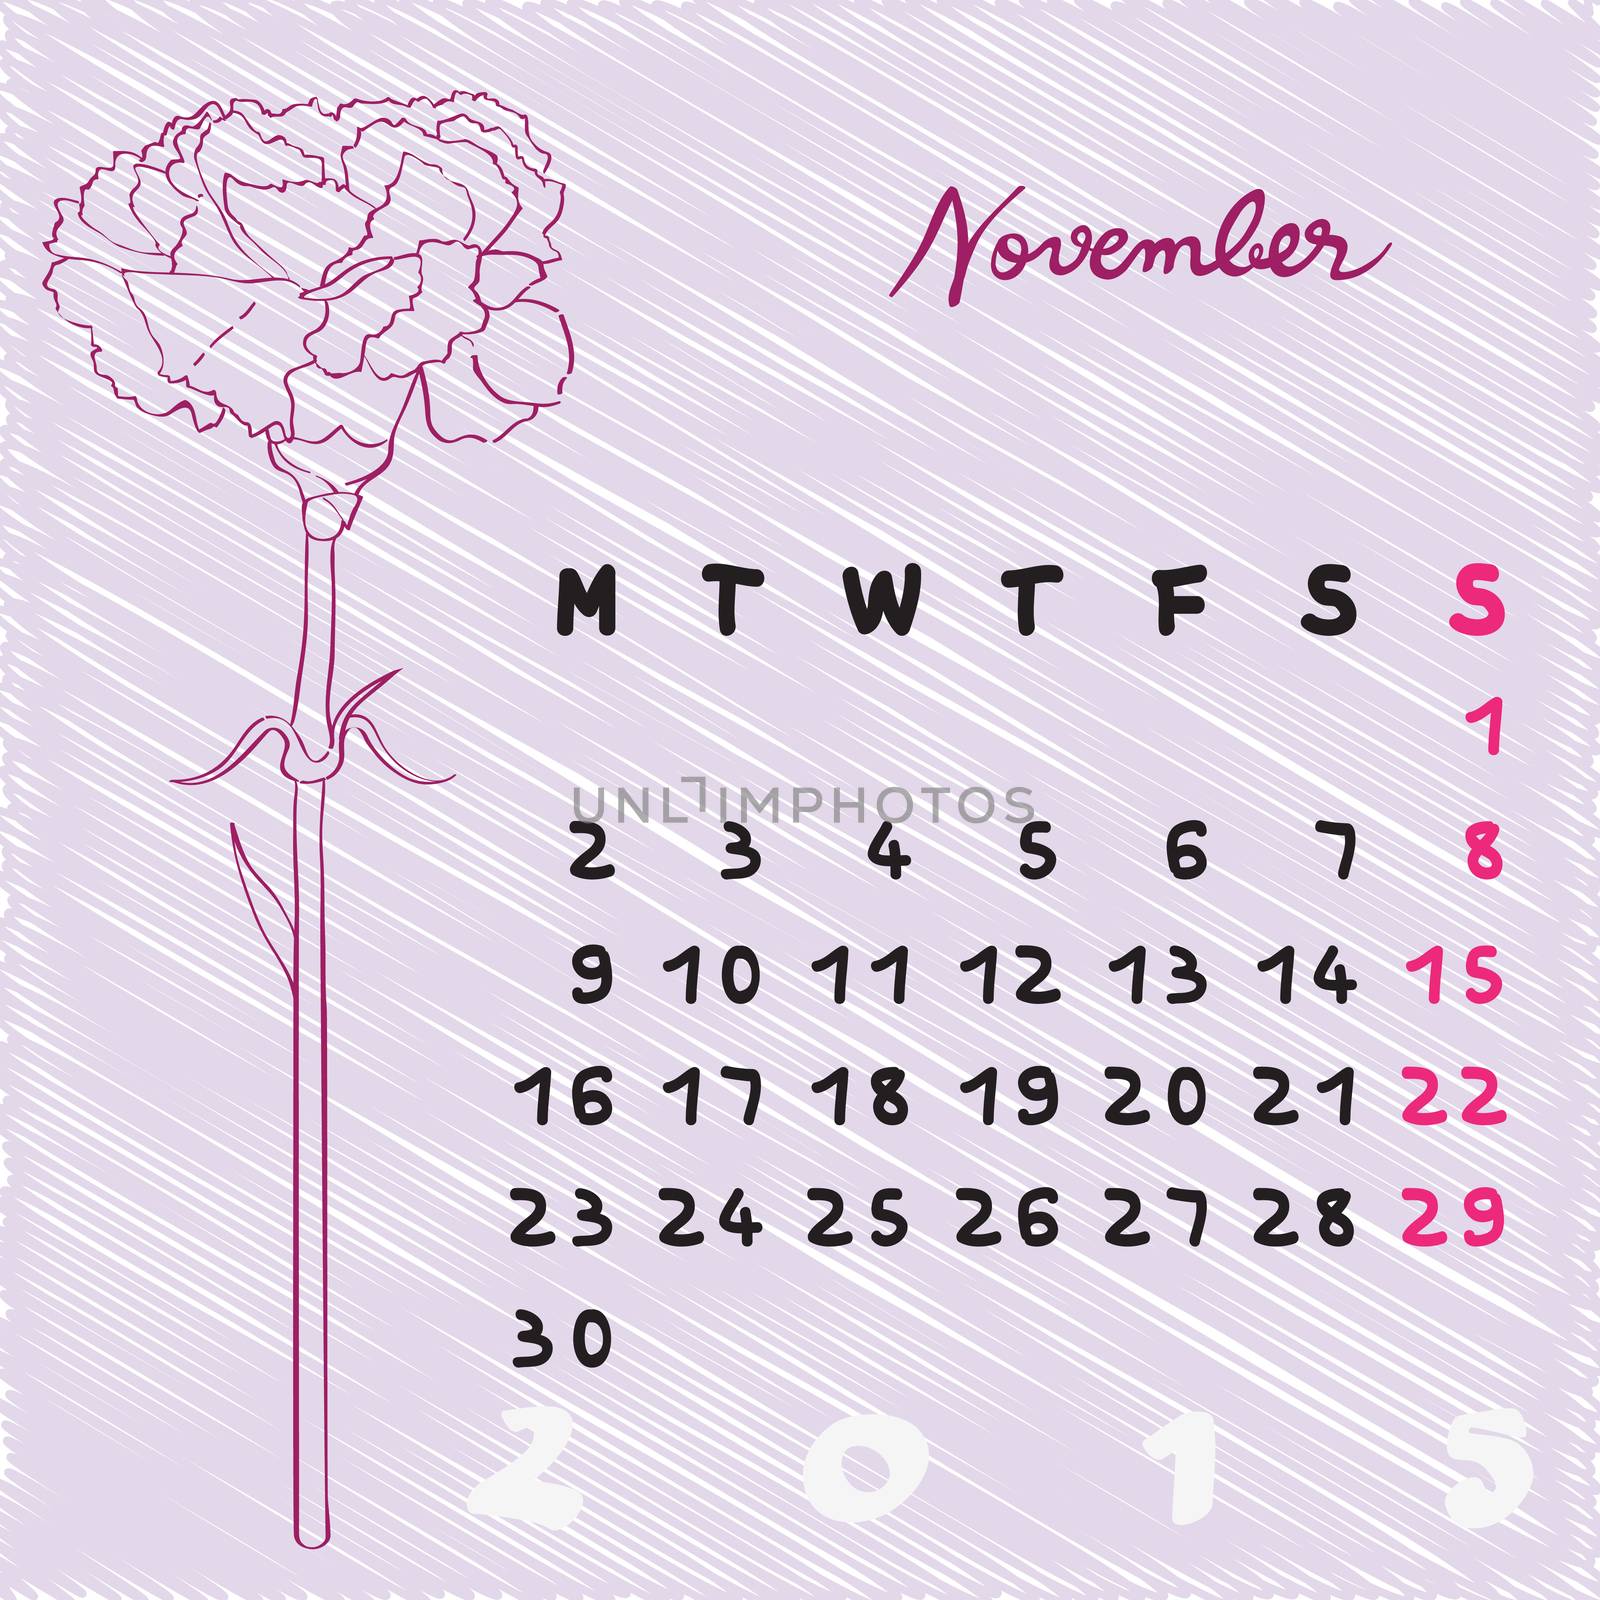 november 2015 flowers by catacos